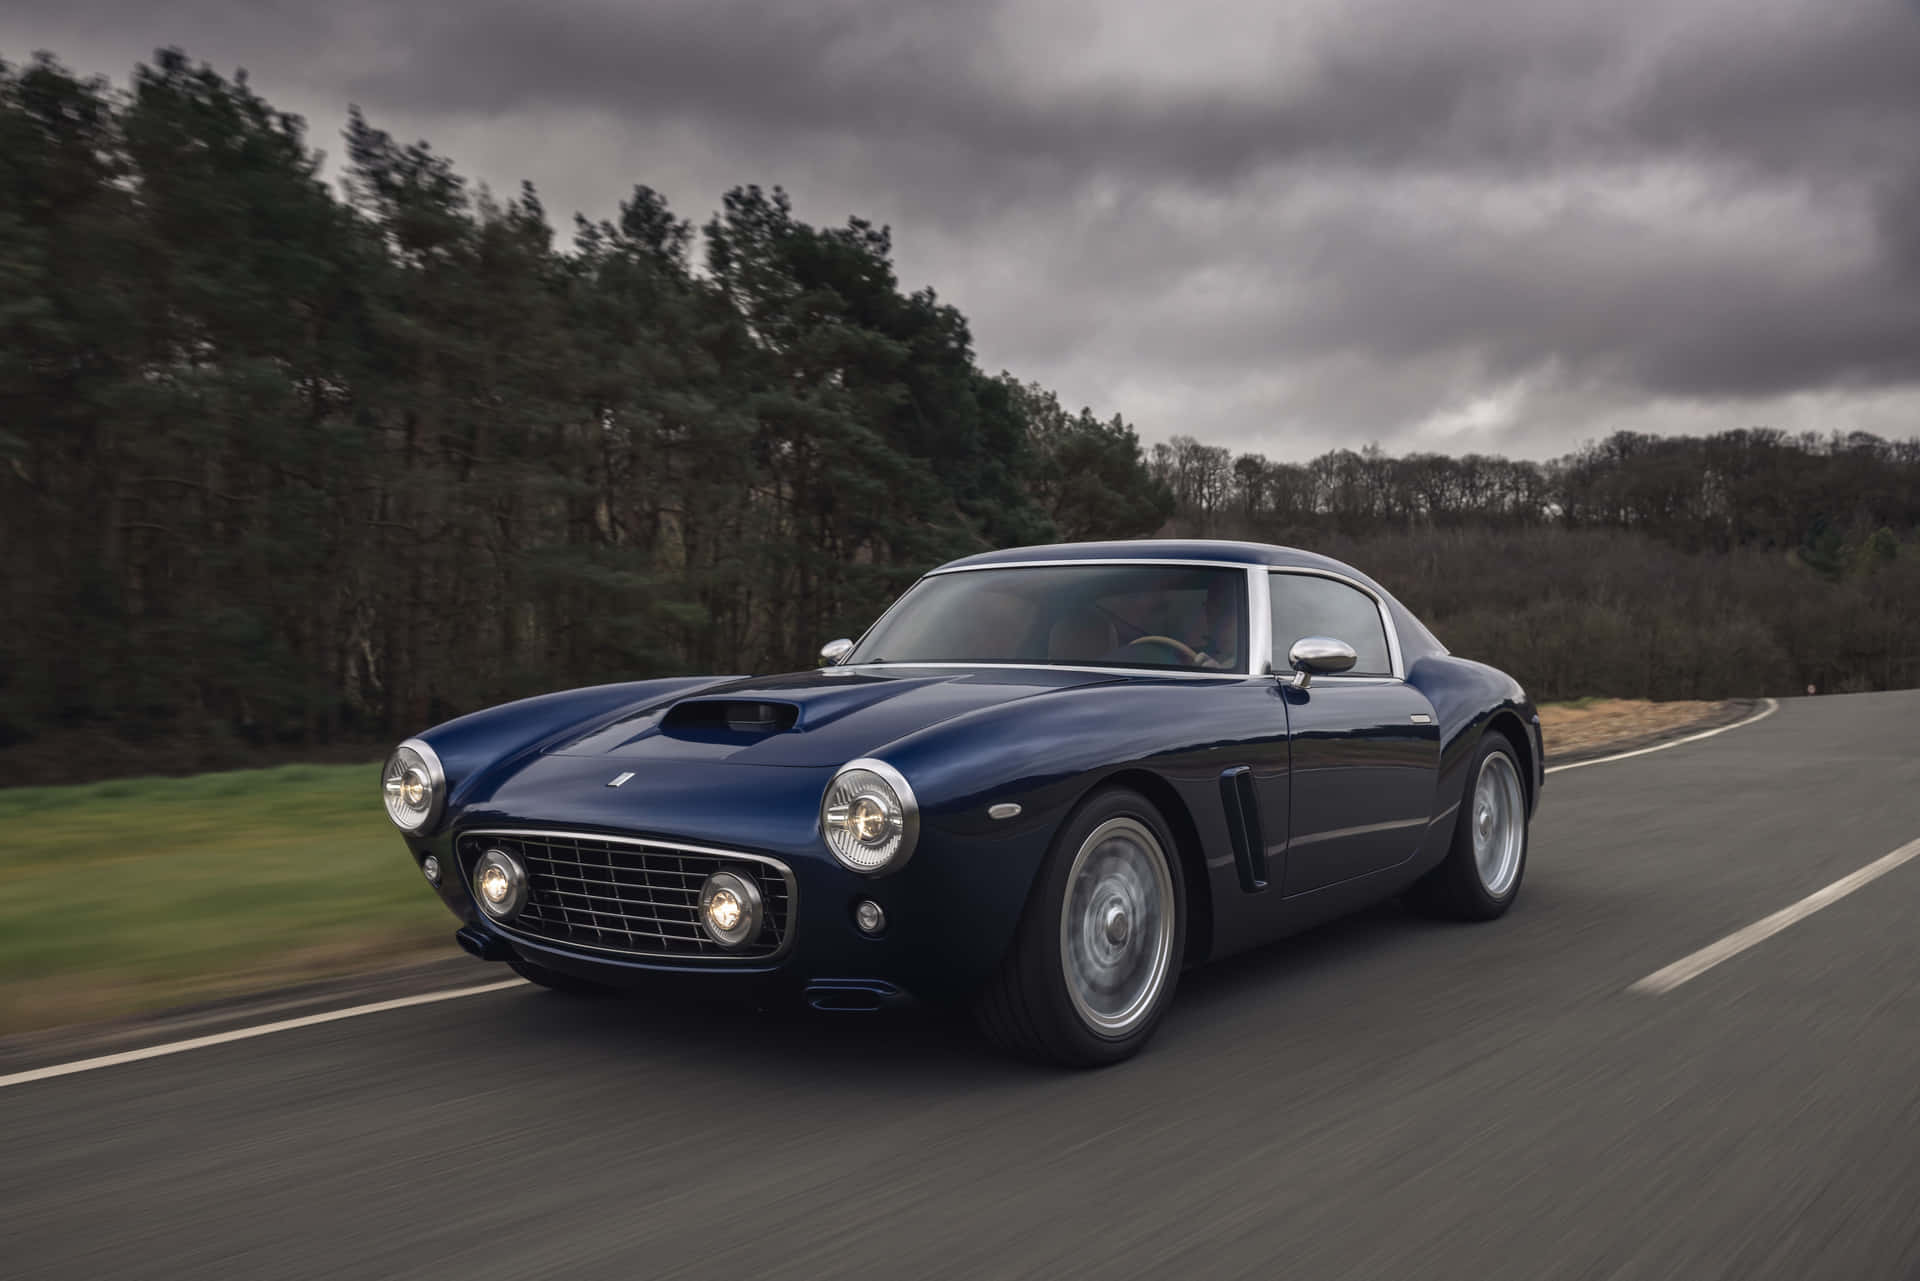 Take a Journey Through History with a Vintage Ferrari Wallpaper